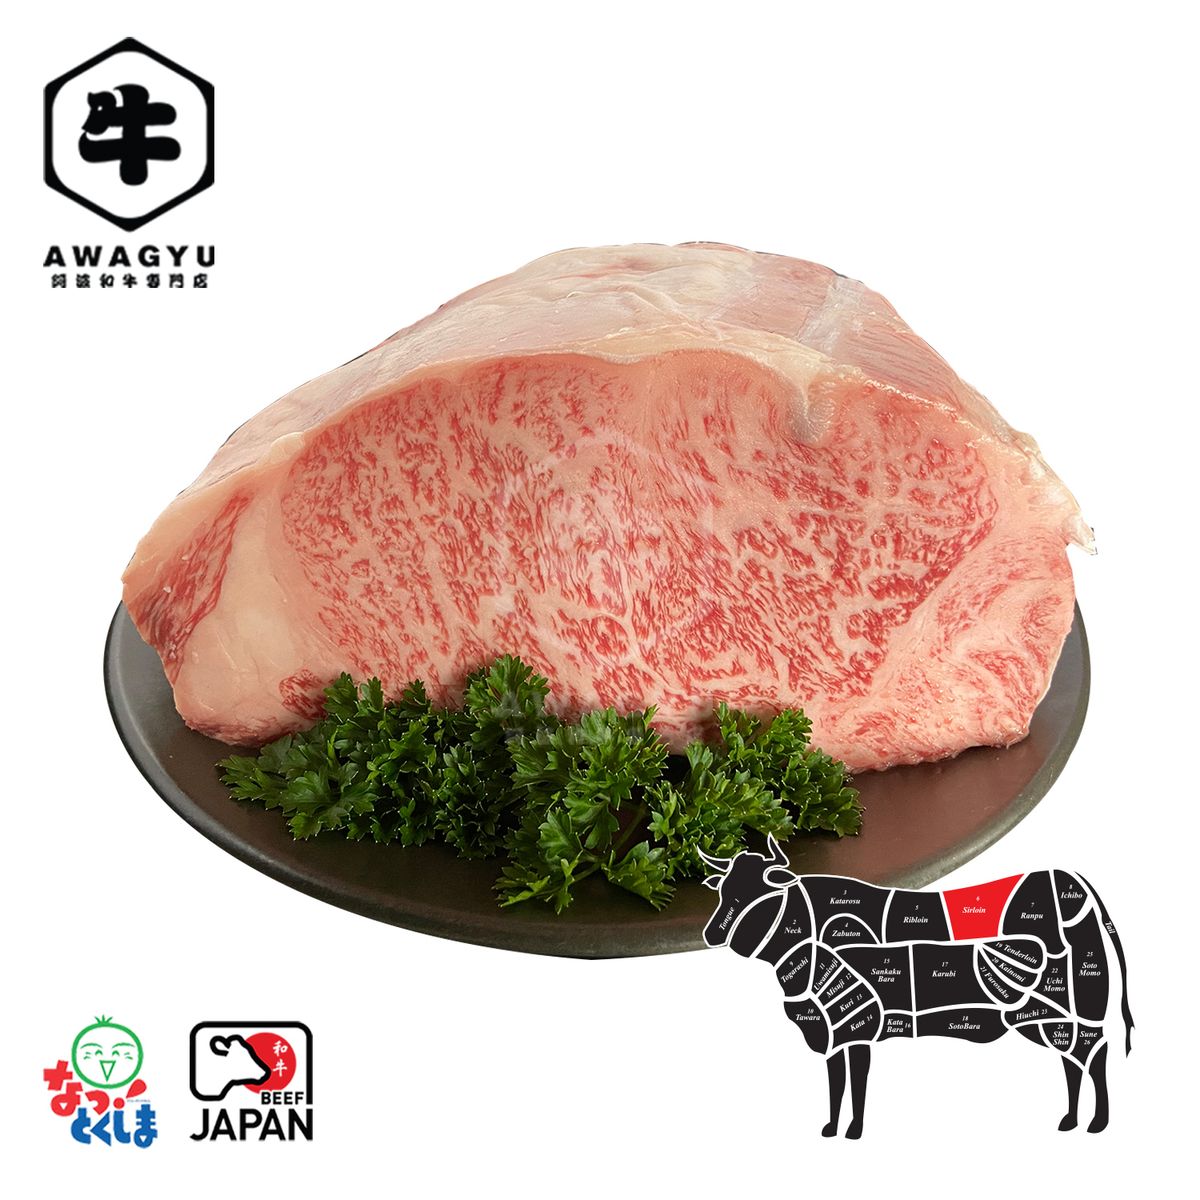 All you need to know about Japanese A5 Wagyu Beef